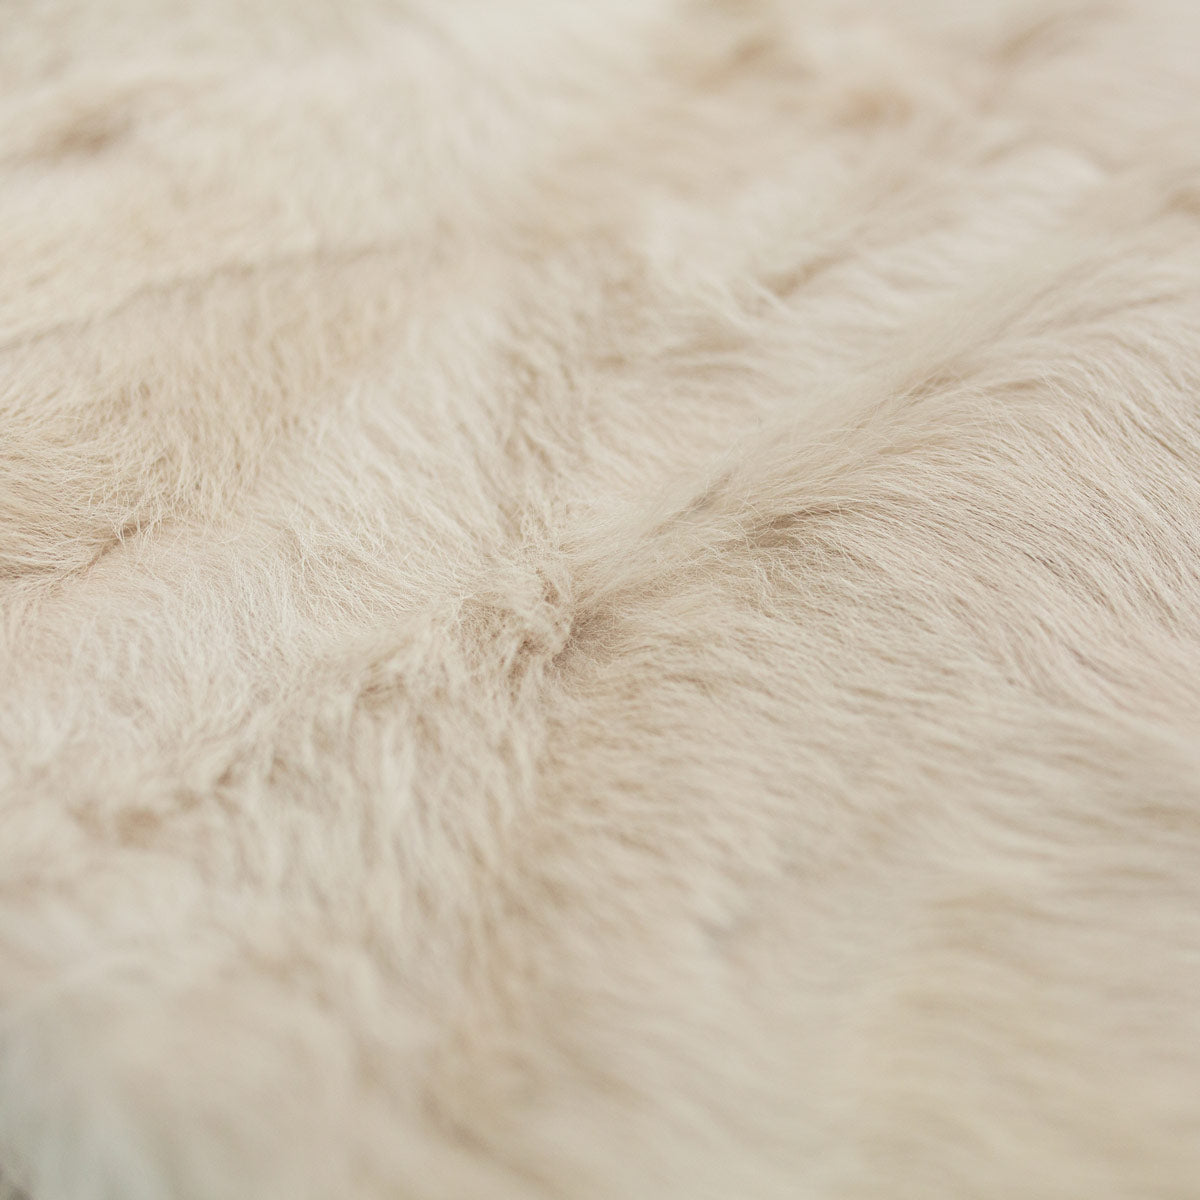 Toscana Real Sheep Fur Throw Lined with Cashmere Blend